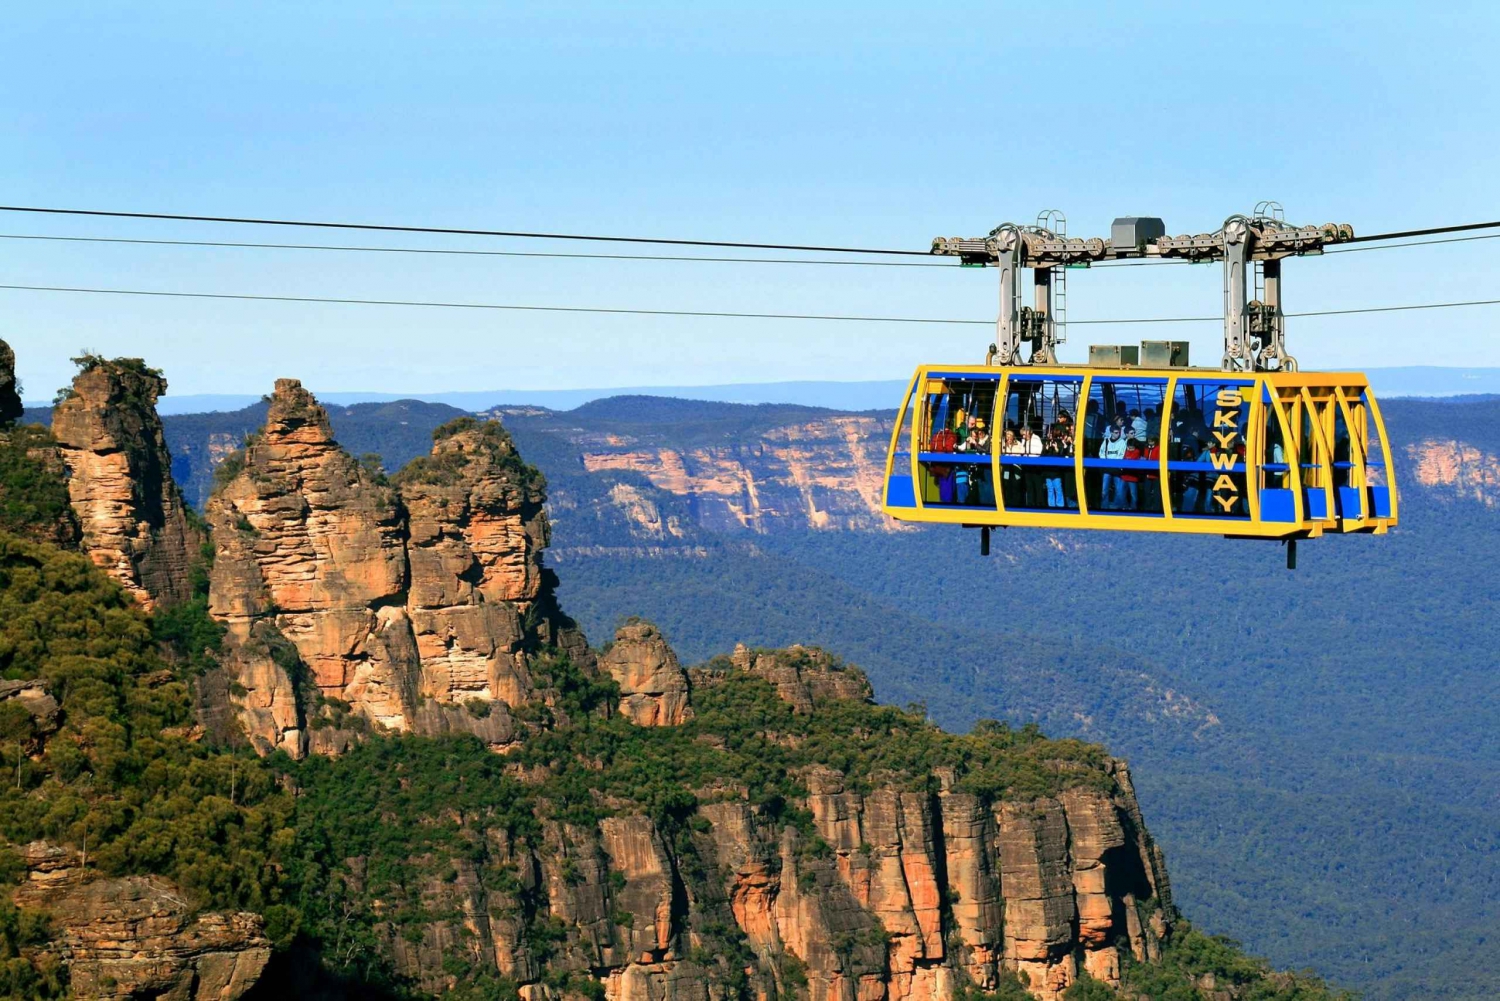 Sydney: Blue Mountains National Park Tour with River Cruise